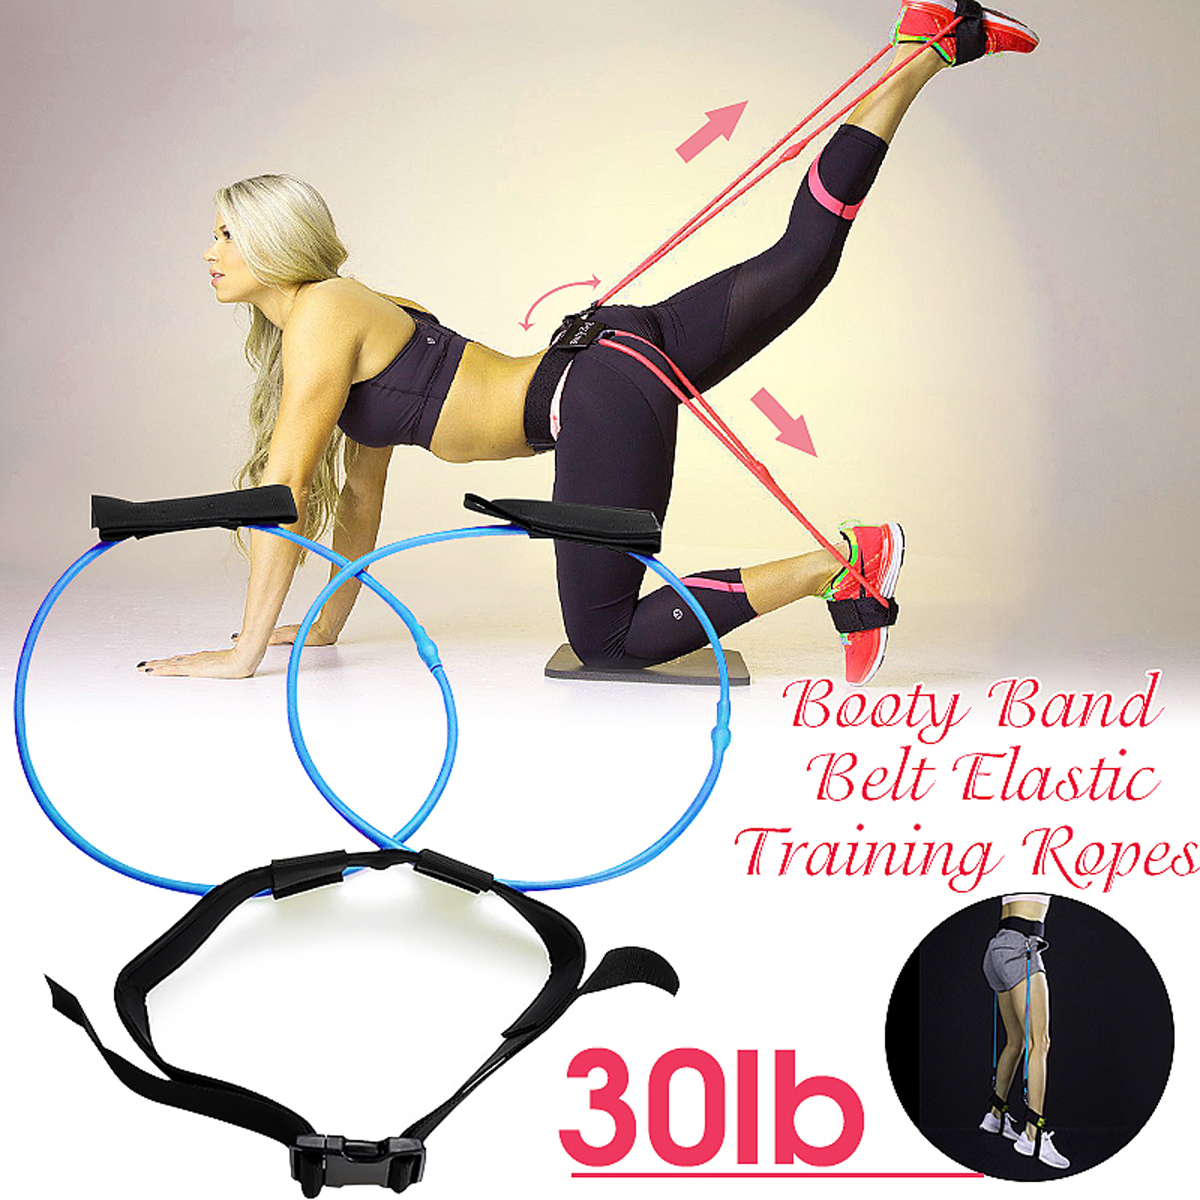 30LB-Booty-Resistance-Bands-Belt-Gym-Exercise-Training-Yoga-Butt-Lift-Fitness-Health-Workout-Band-1372253